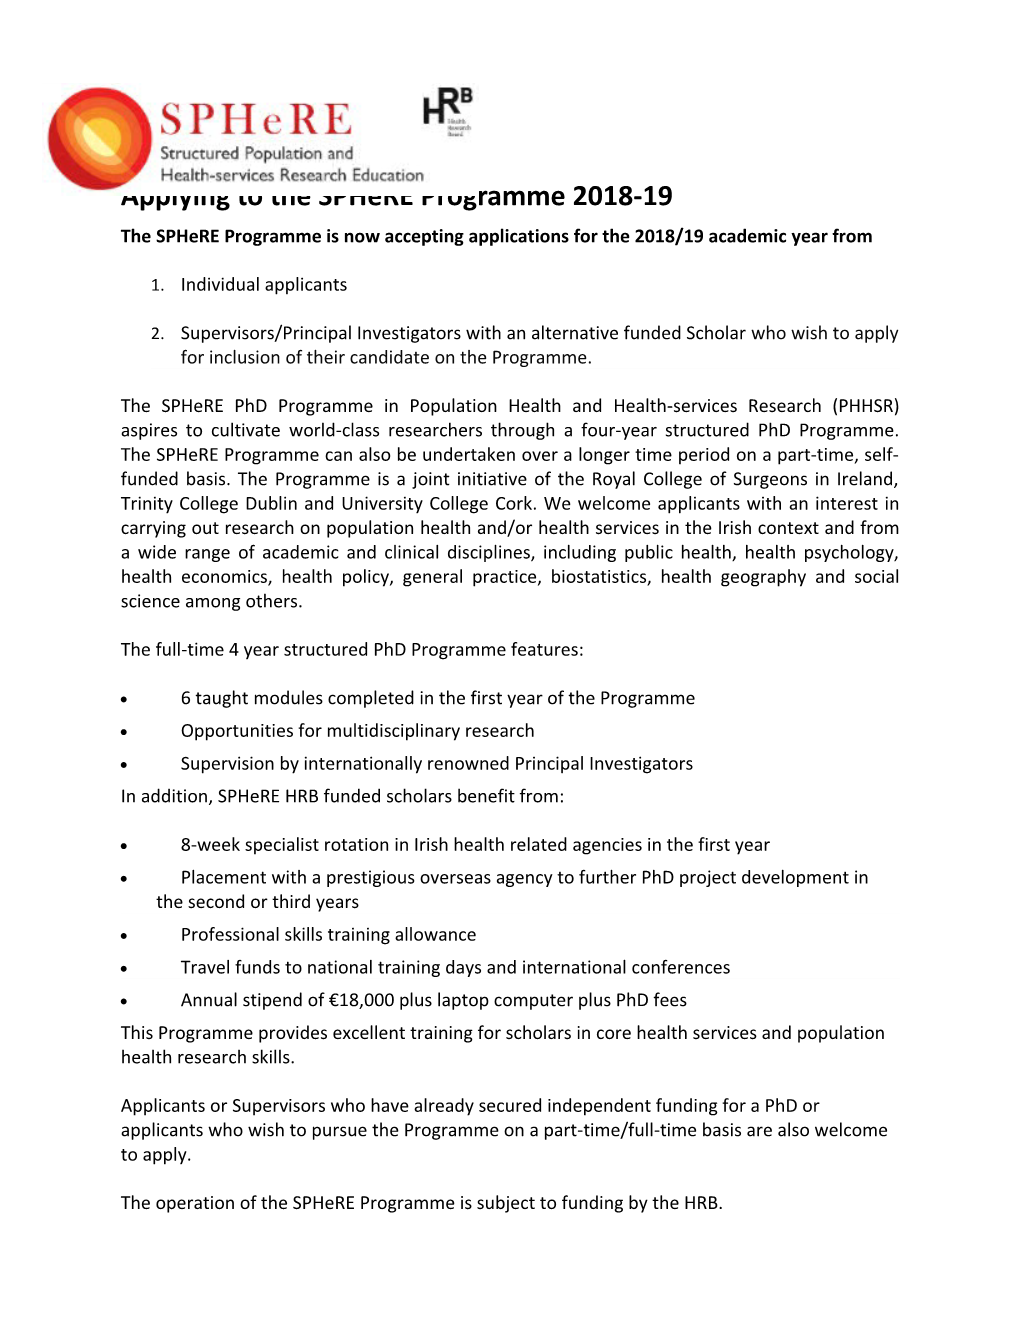 Applying to the Sphere Programme 2018-19